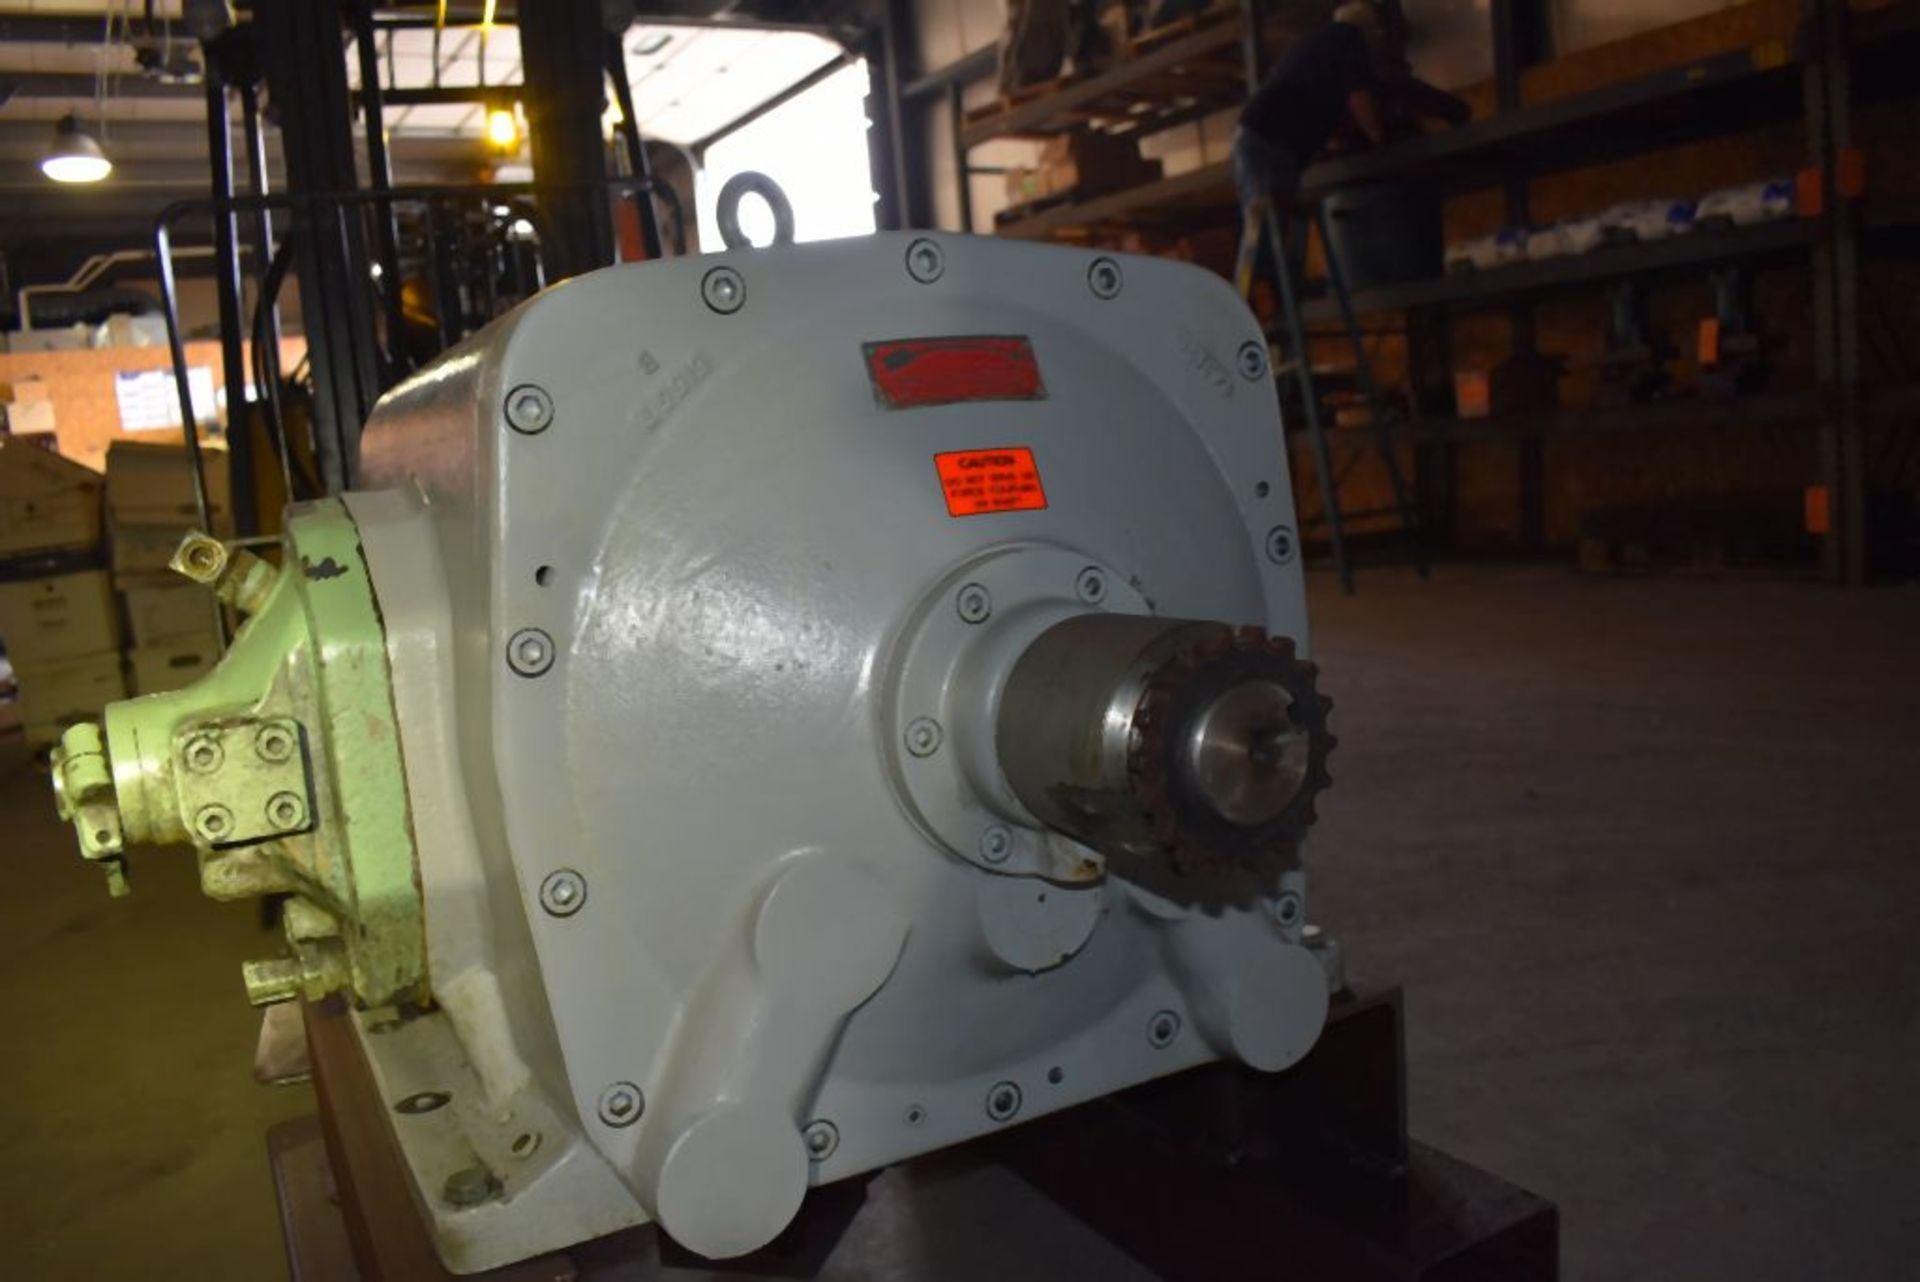 RACINE HYDRAULIC PUMP, OILGEAR, TYPE DH-6025, S/N: 38169, RATED PRESSURE 2500, RPM 900 - Image 3 of 7